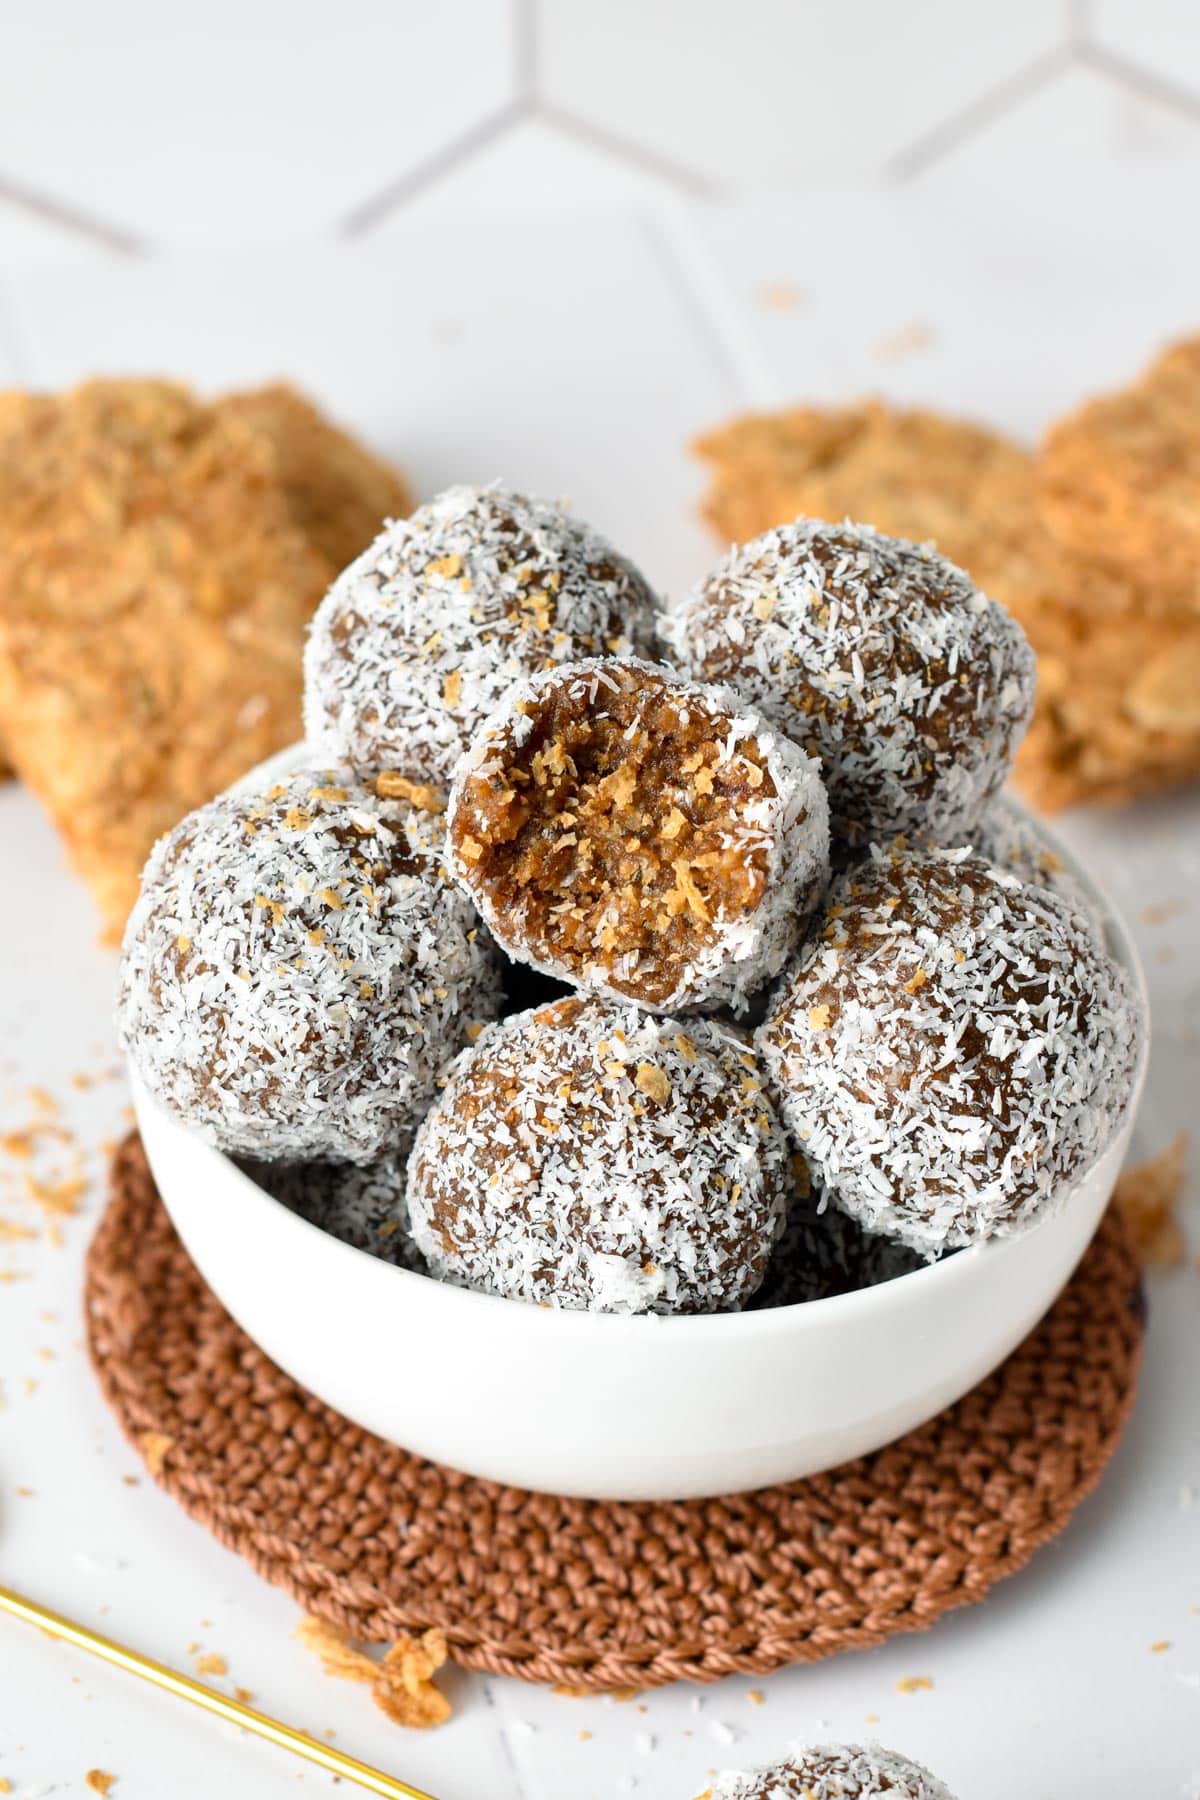 These Weetbix Bliss Balls are quick and easy energy bites filled with crunchy bites of Weetbix biscuits. They are the perfect kid's lunchbox snack or healthy treat to fix your sweet tooth.